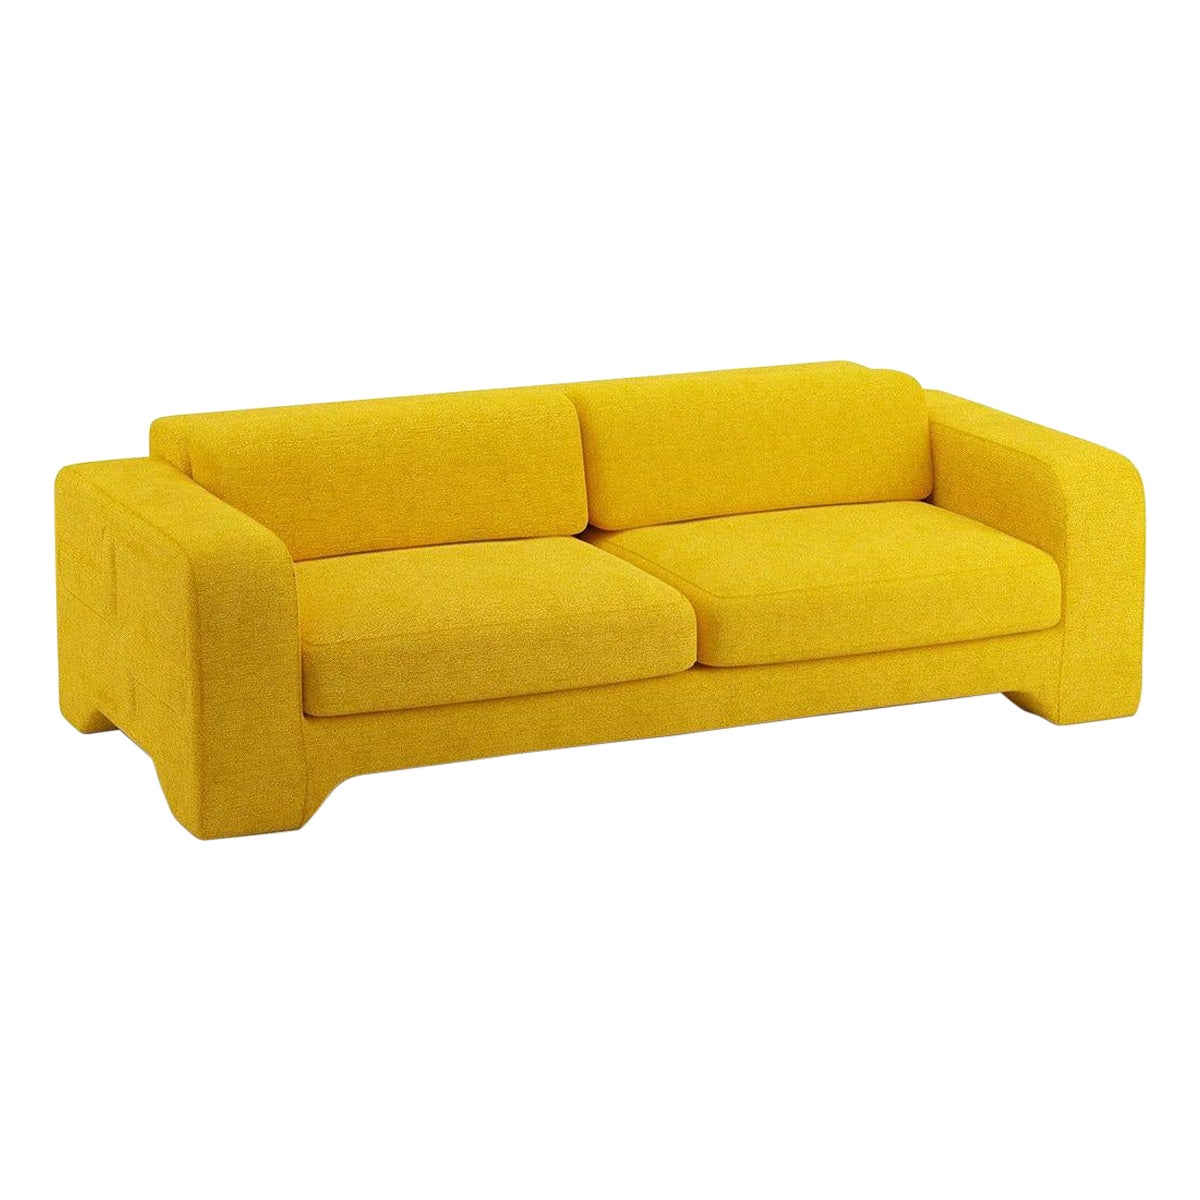 Popus Editions Giovanna 4 Seater Sofa in Corn Megeve Fabric with a Knit Effect For Sale